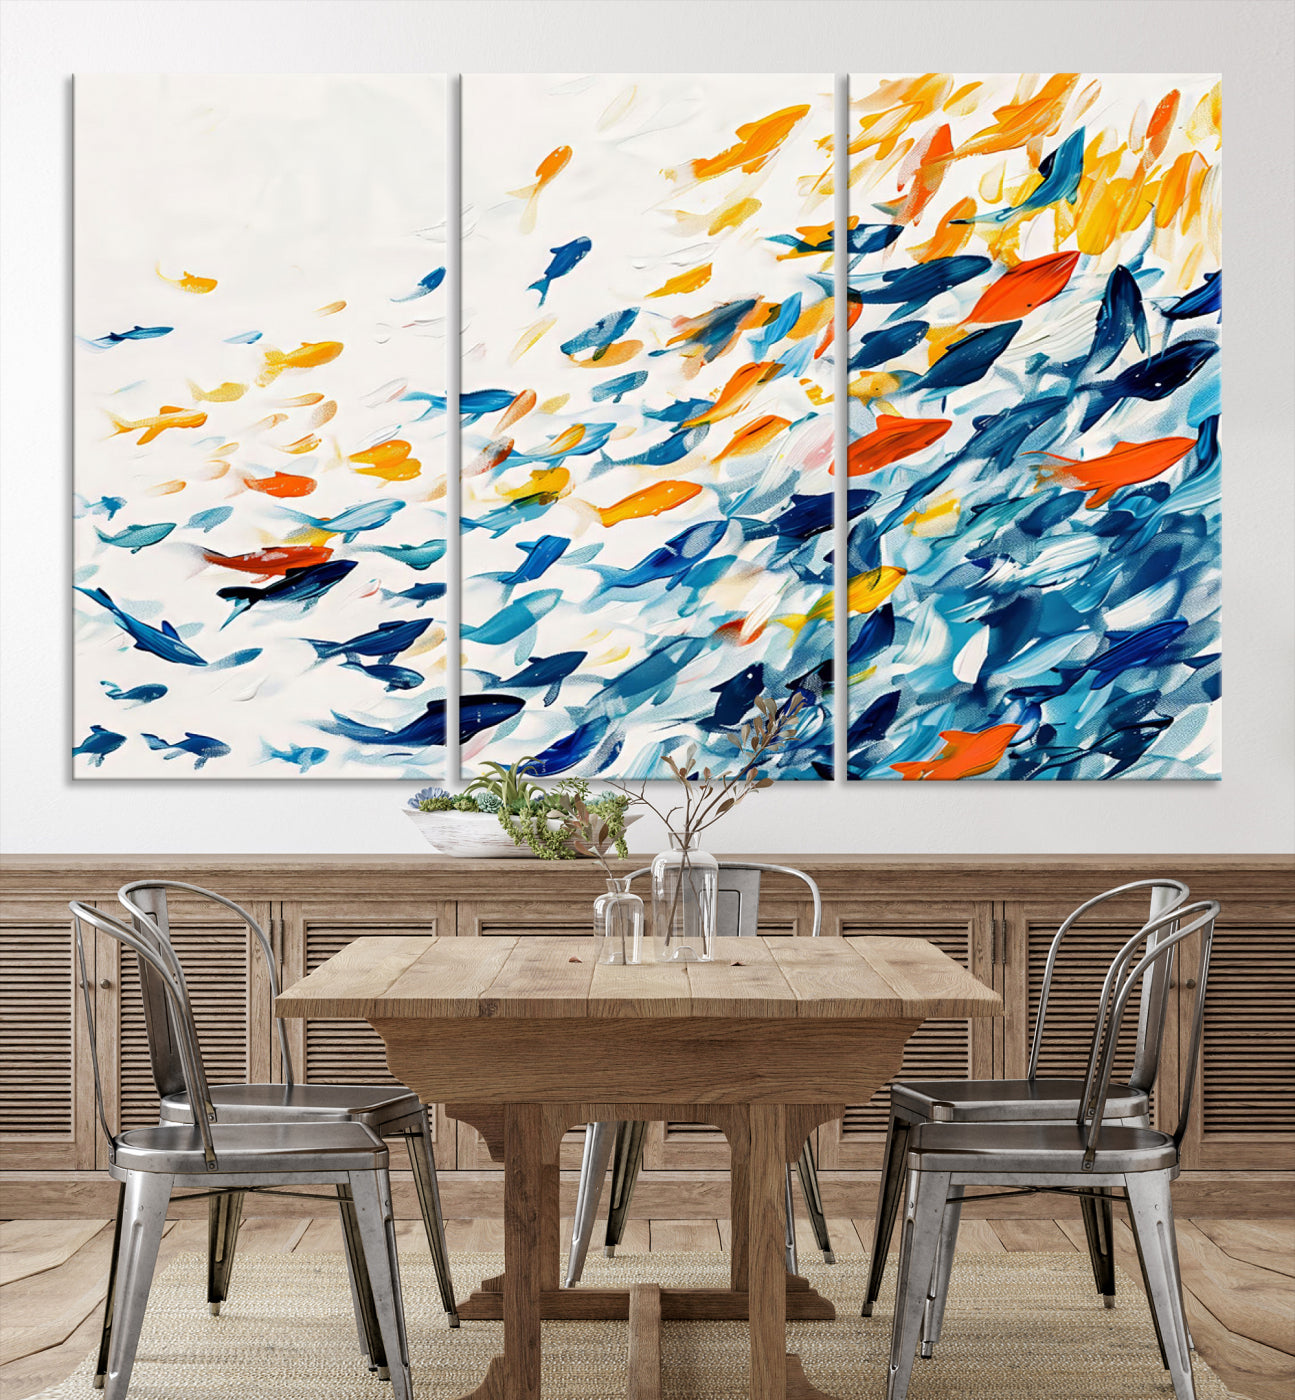 Abstract Fish Shoal Wall Art Canvas Print, Colorful Fish Herd Painting on Canvas Print